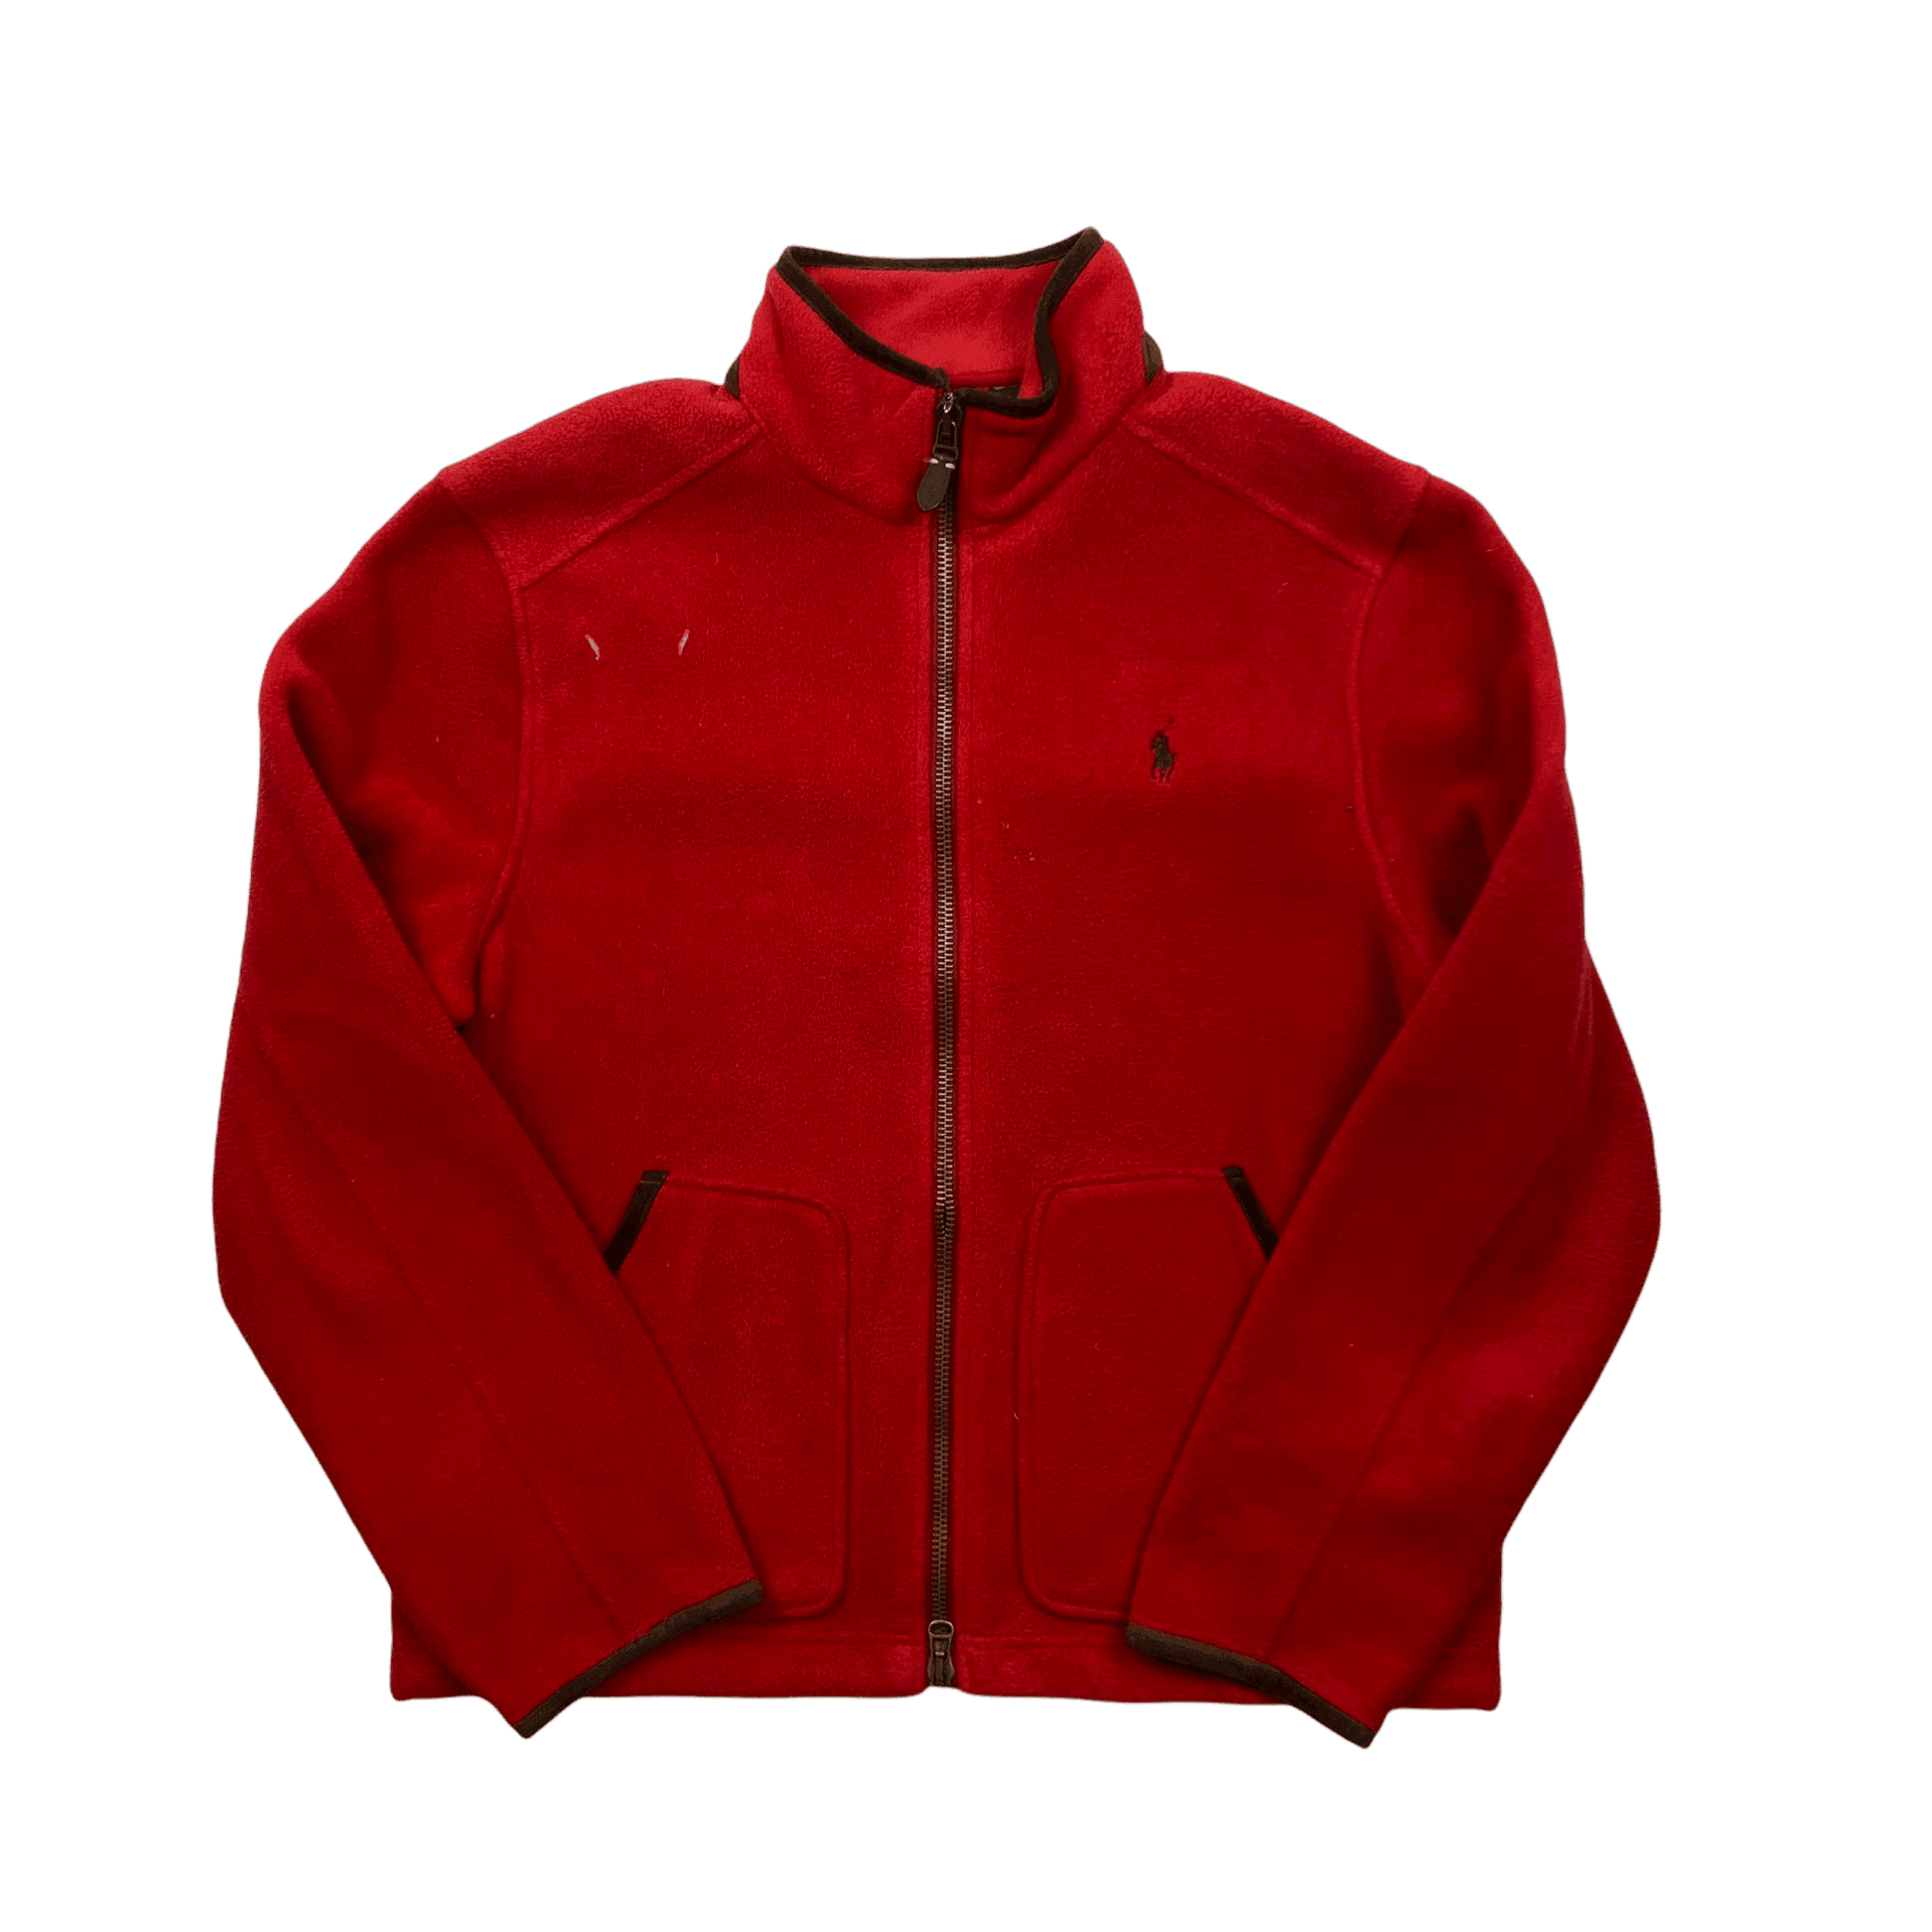 Vintage 90s Red Polo Ralph Lauren Fleece Jacket - Large (Recommended Size - Medium) - The Streetwear Studio